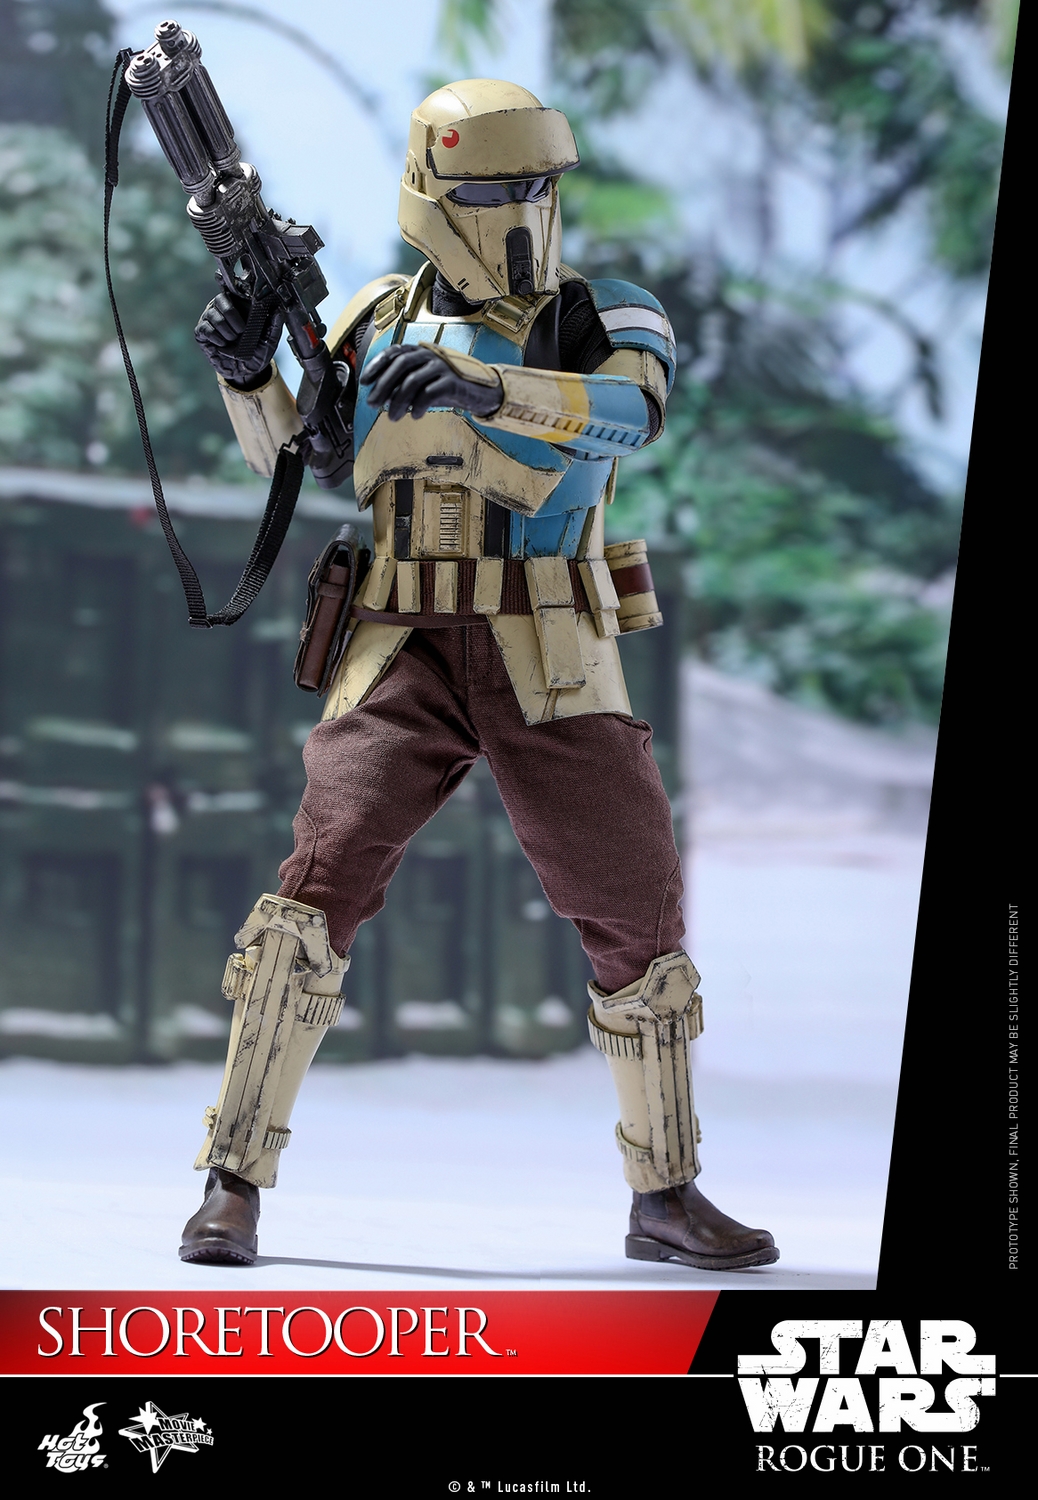 hot-toys-star-wars-rogue-one-shoretrooper-collectible-figure-092916-016.jpg